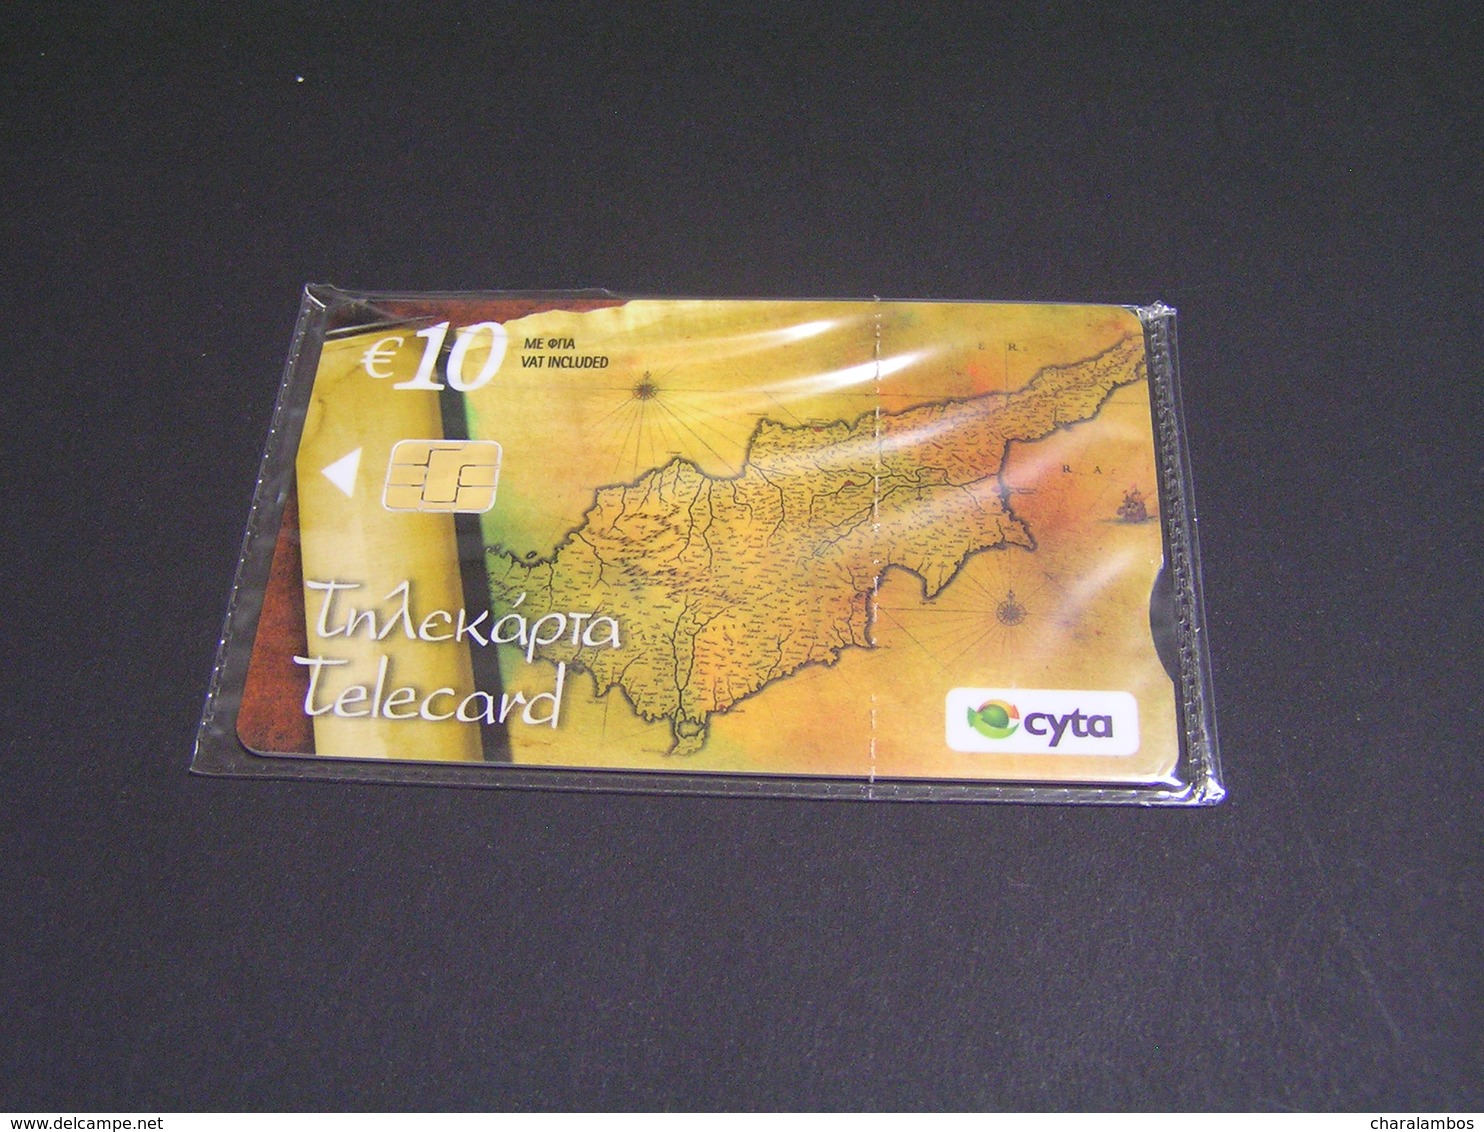 CYPRUS - 50 Years Cyprus Republic/Map Collector"s Card No 21, Tirage 500, 11/10, Mint - Cyprus